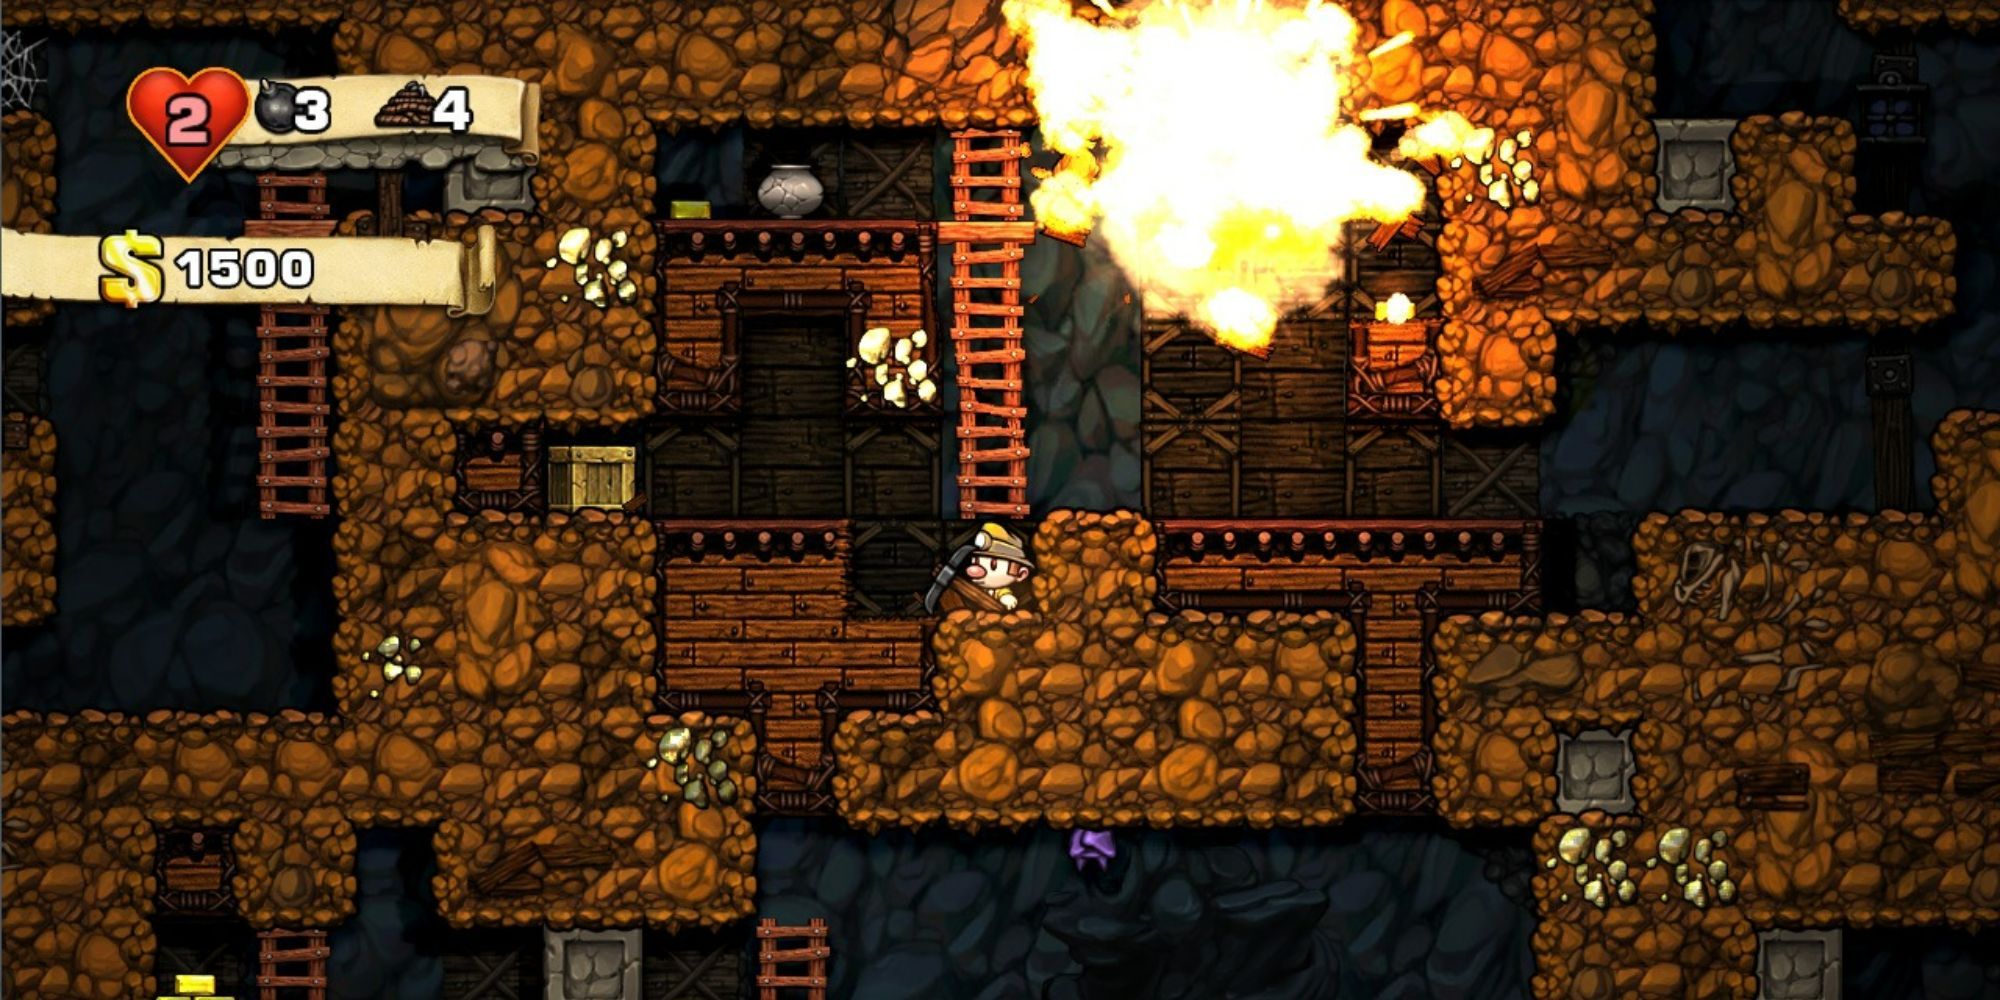 The character standing below an explosion in the cavern in Spelunky